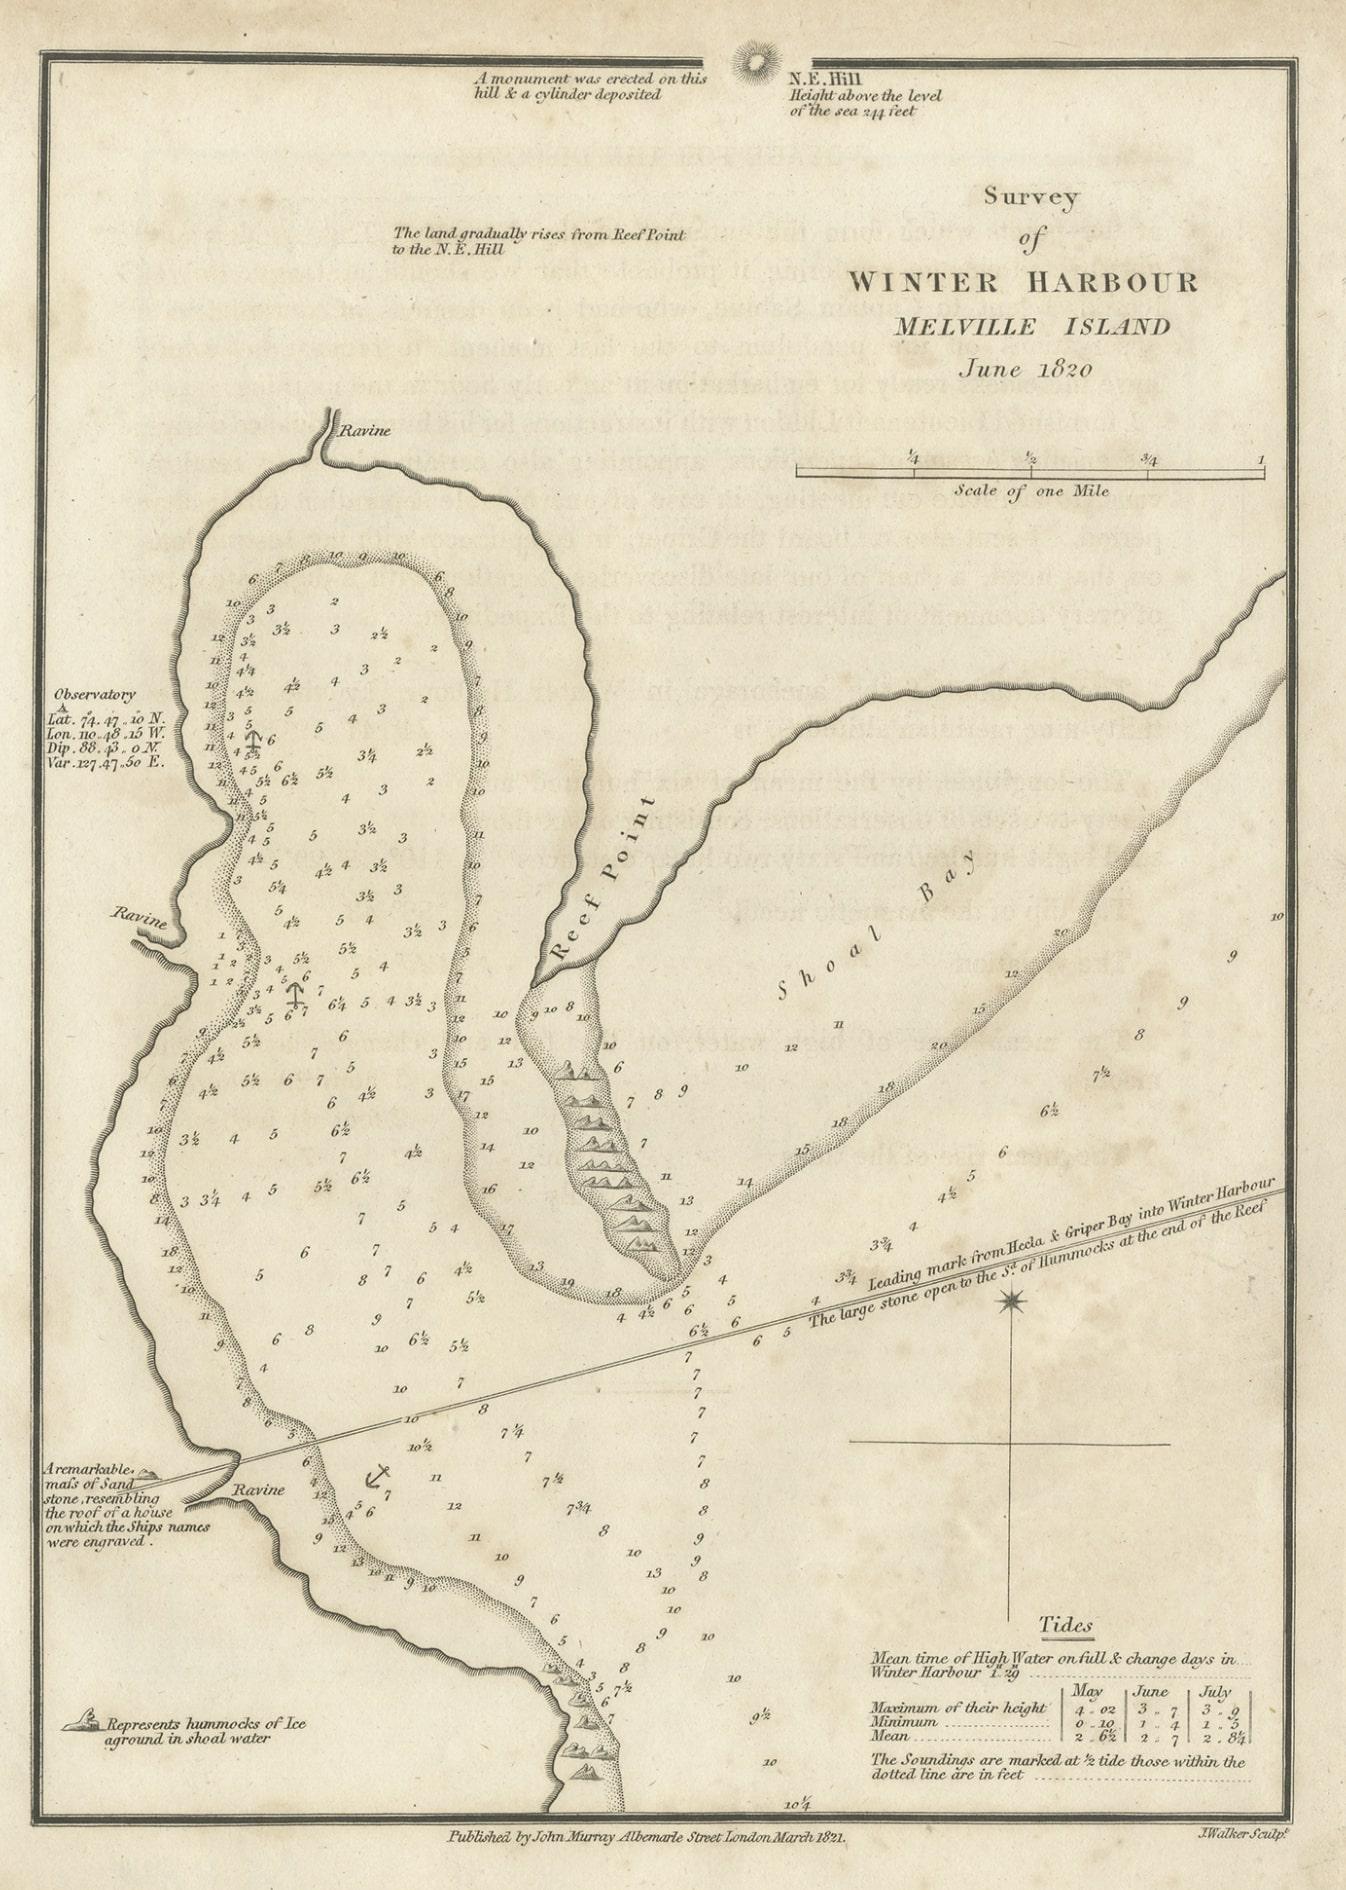 Antique print titled 'Survey of Winter Harbour Melville Island, June 1820'. 

Chart of the bay or harbor on Melville Island where William Parry's expedition spent the winter of 1819-20. This print orginates from 'Journal of a voyage for the